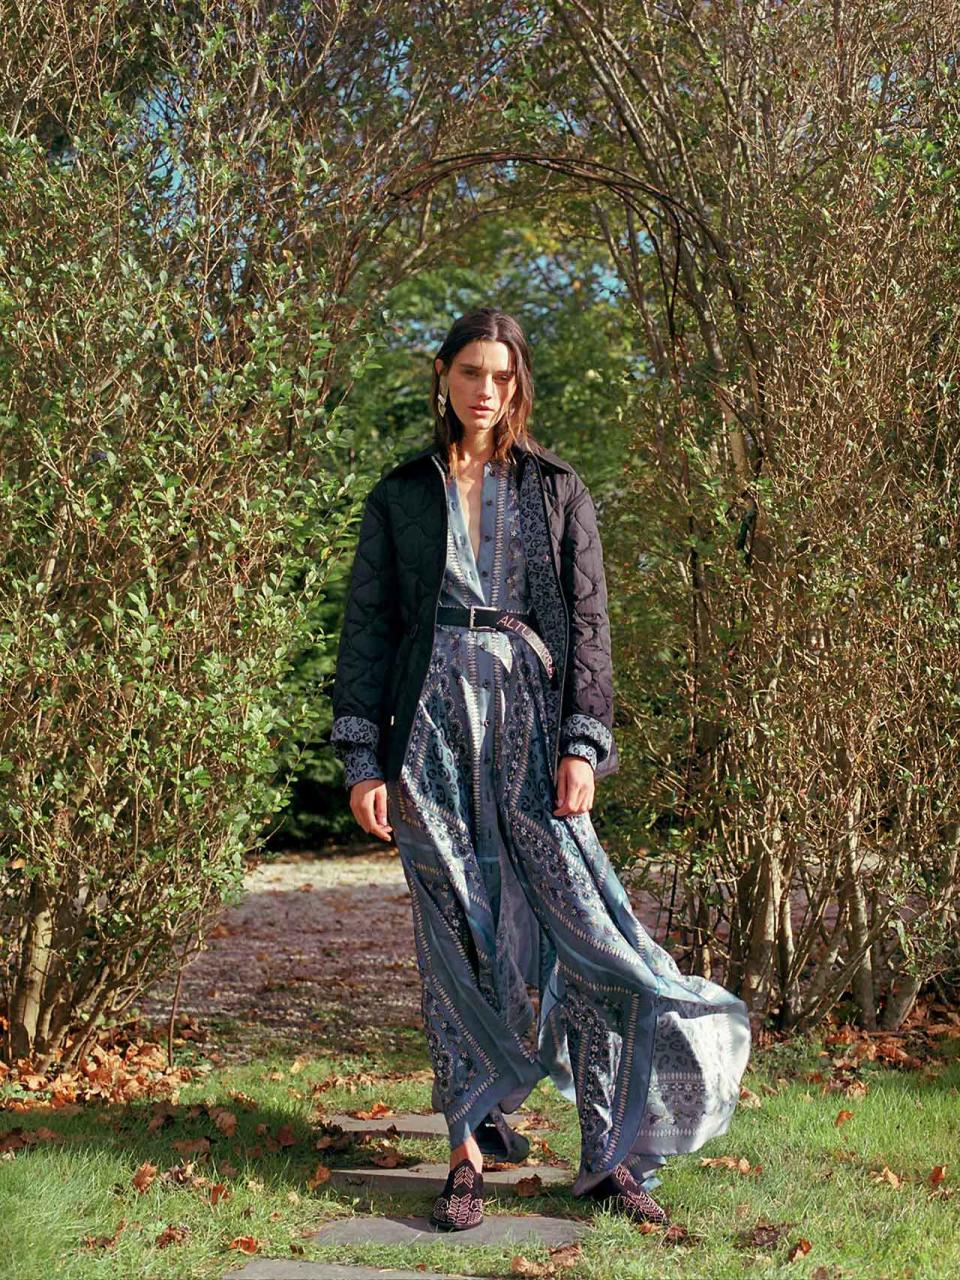 <h2>The New Boho Dress</h2> <p>Asymmetrical hems and billowing sleeves are quintessential bohemia. For pre-fall, designers like <span>Altuzarra</span>, <span>Erdem</span> and Elie Saab are giving the <span>boho</span> dress a ladylike update with prim necklines and tailored lines done in mid-lengths.</p> <h4>Courtesy of Altuzarra</h4>